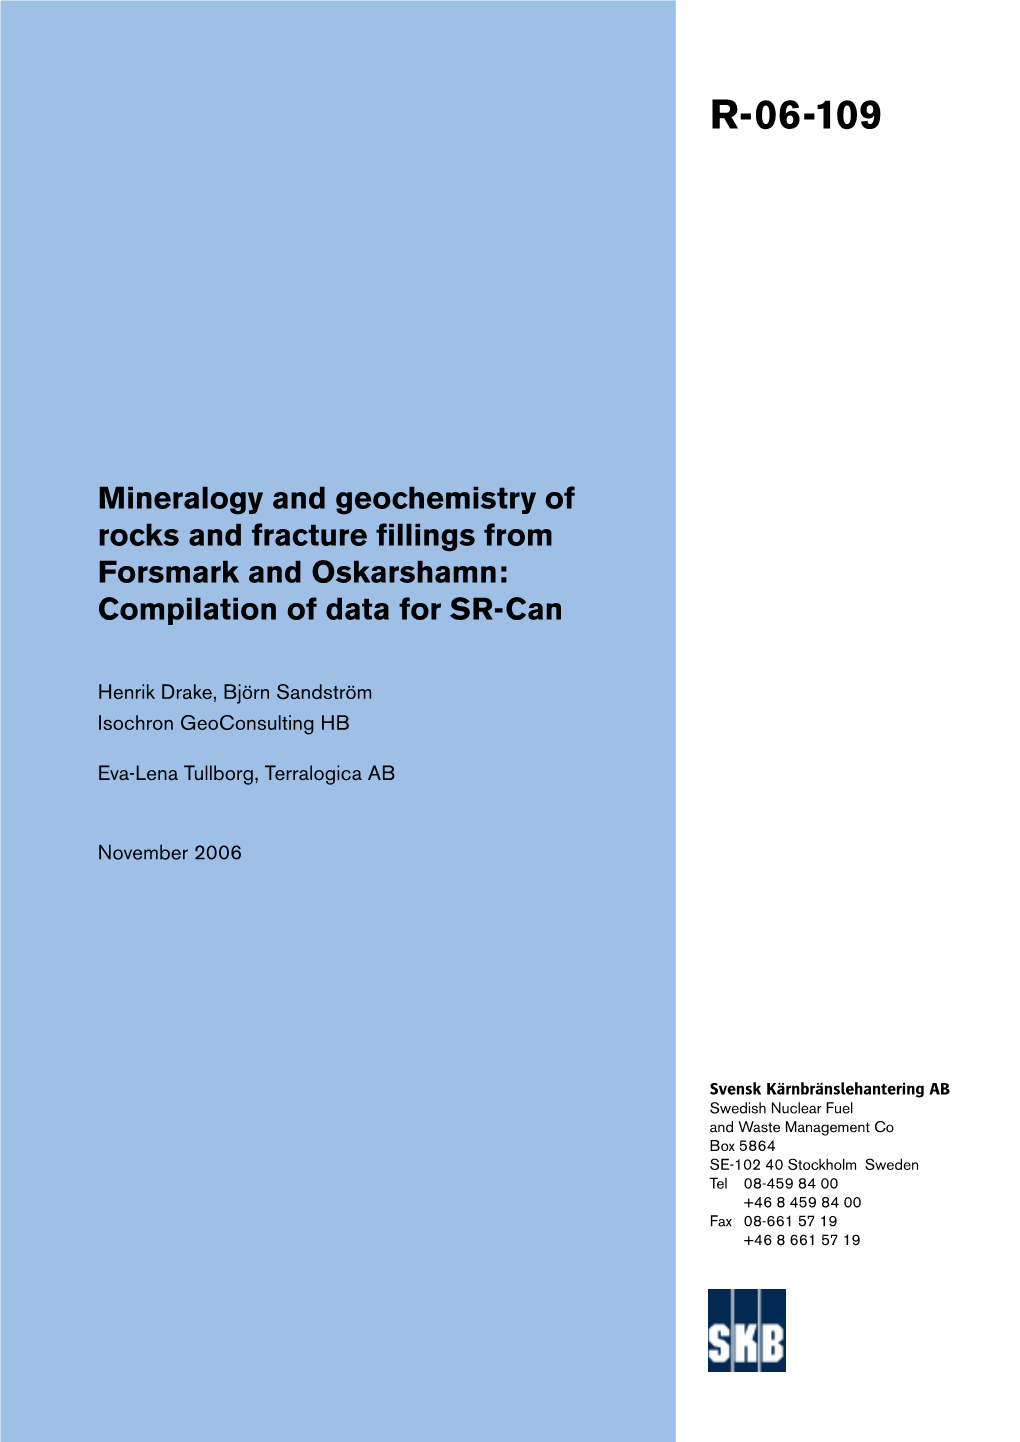 Mineralogy and Geochemistry of Rocks and Fracture Fillings from Forsmark and Oskarshamn: Compilation of Data for SR-Can